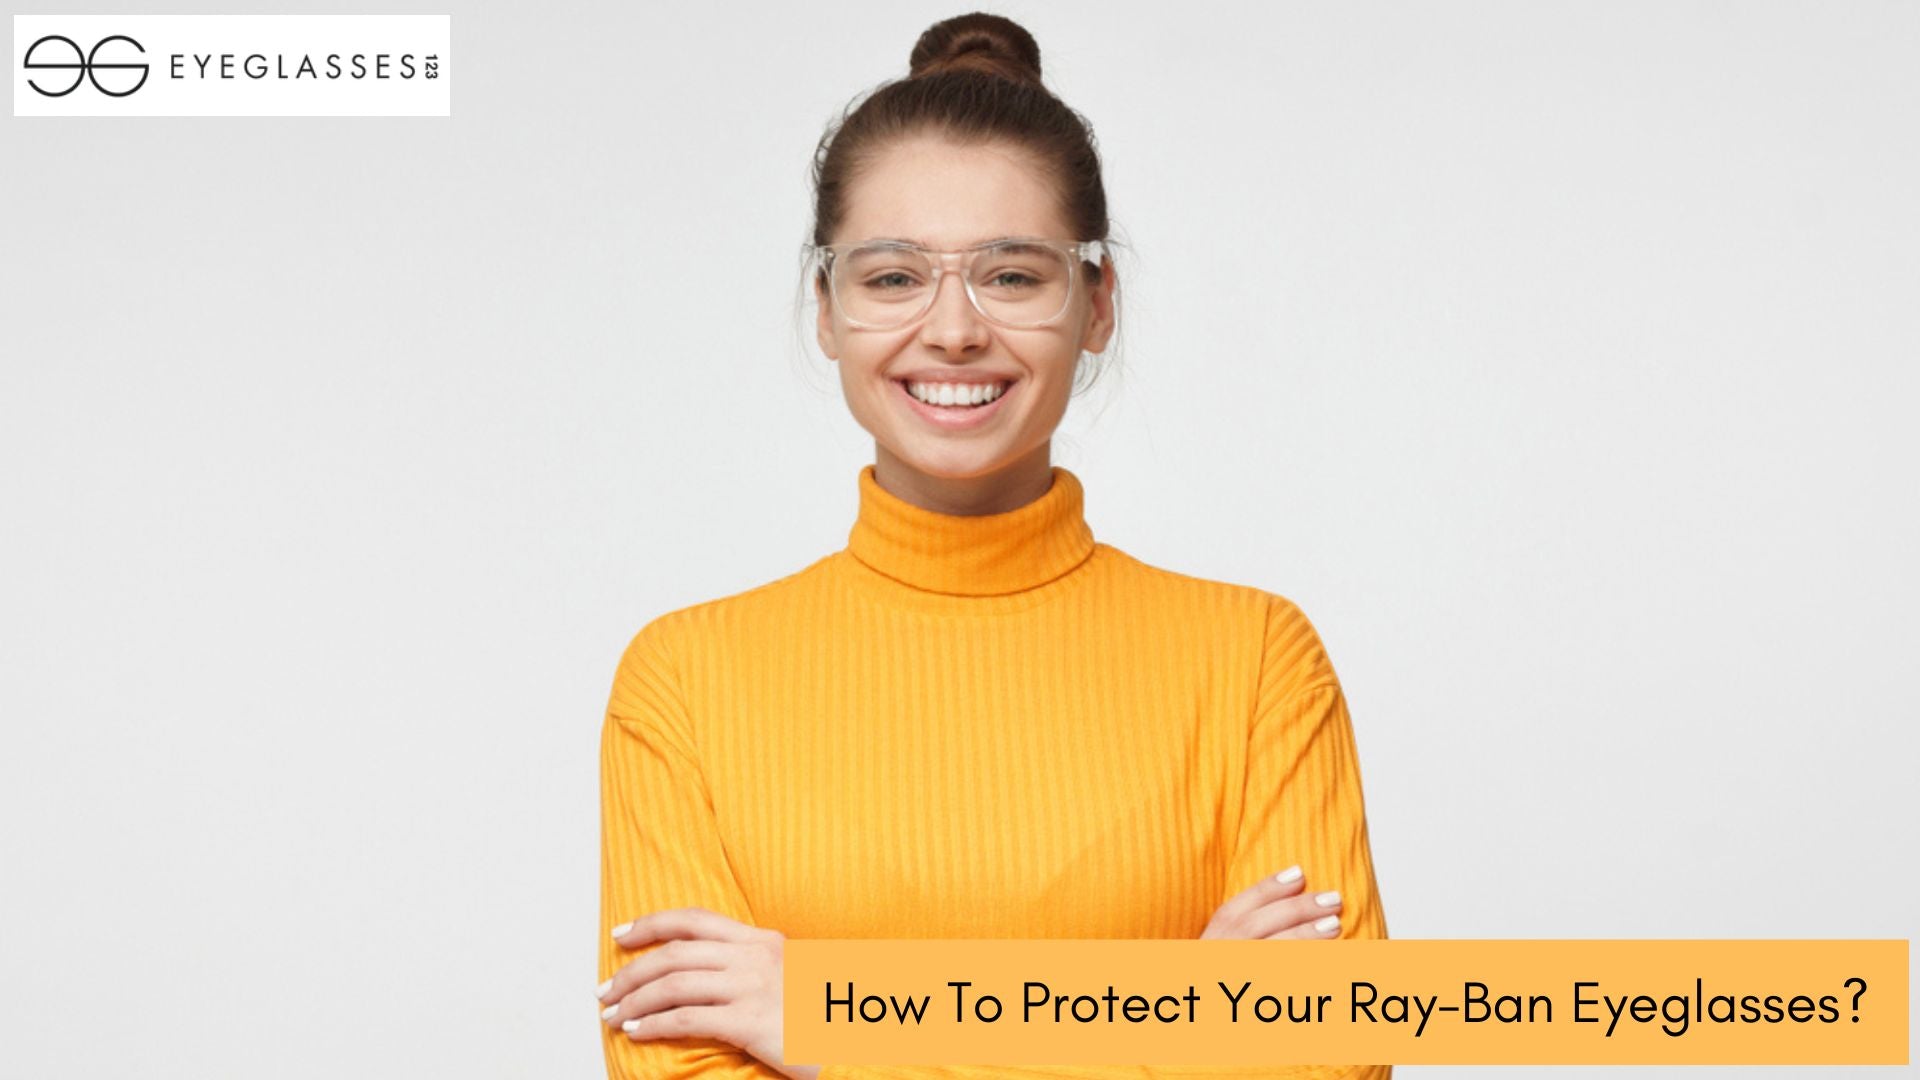 How To Protect Your Ray-Ban Eyeglasses?